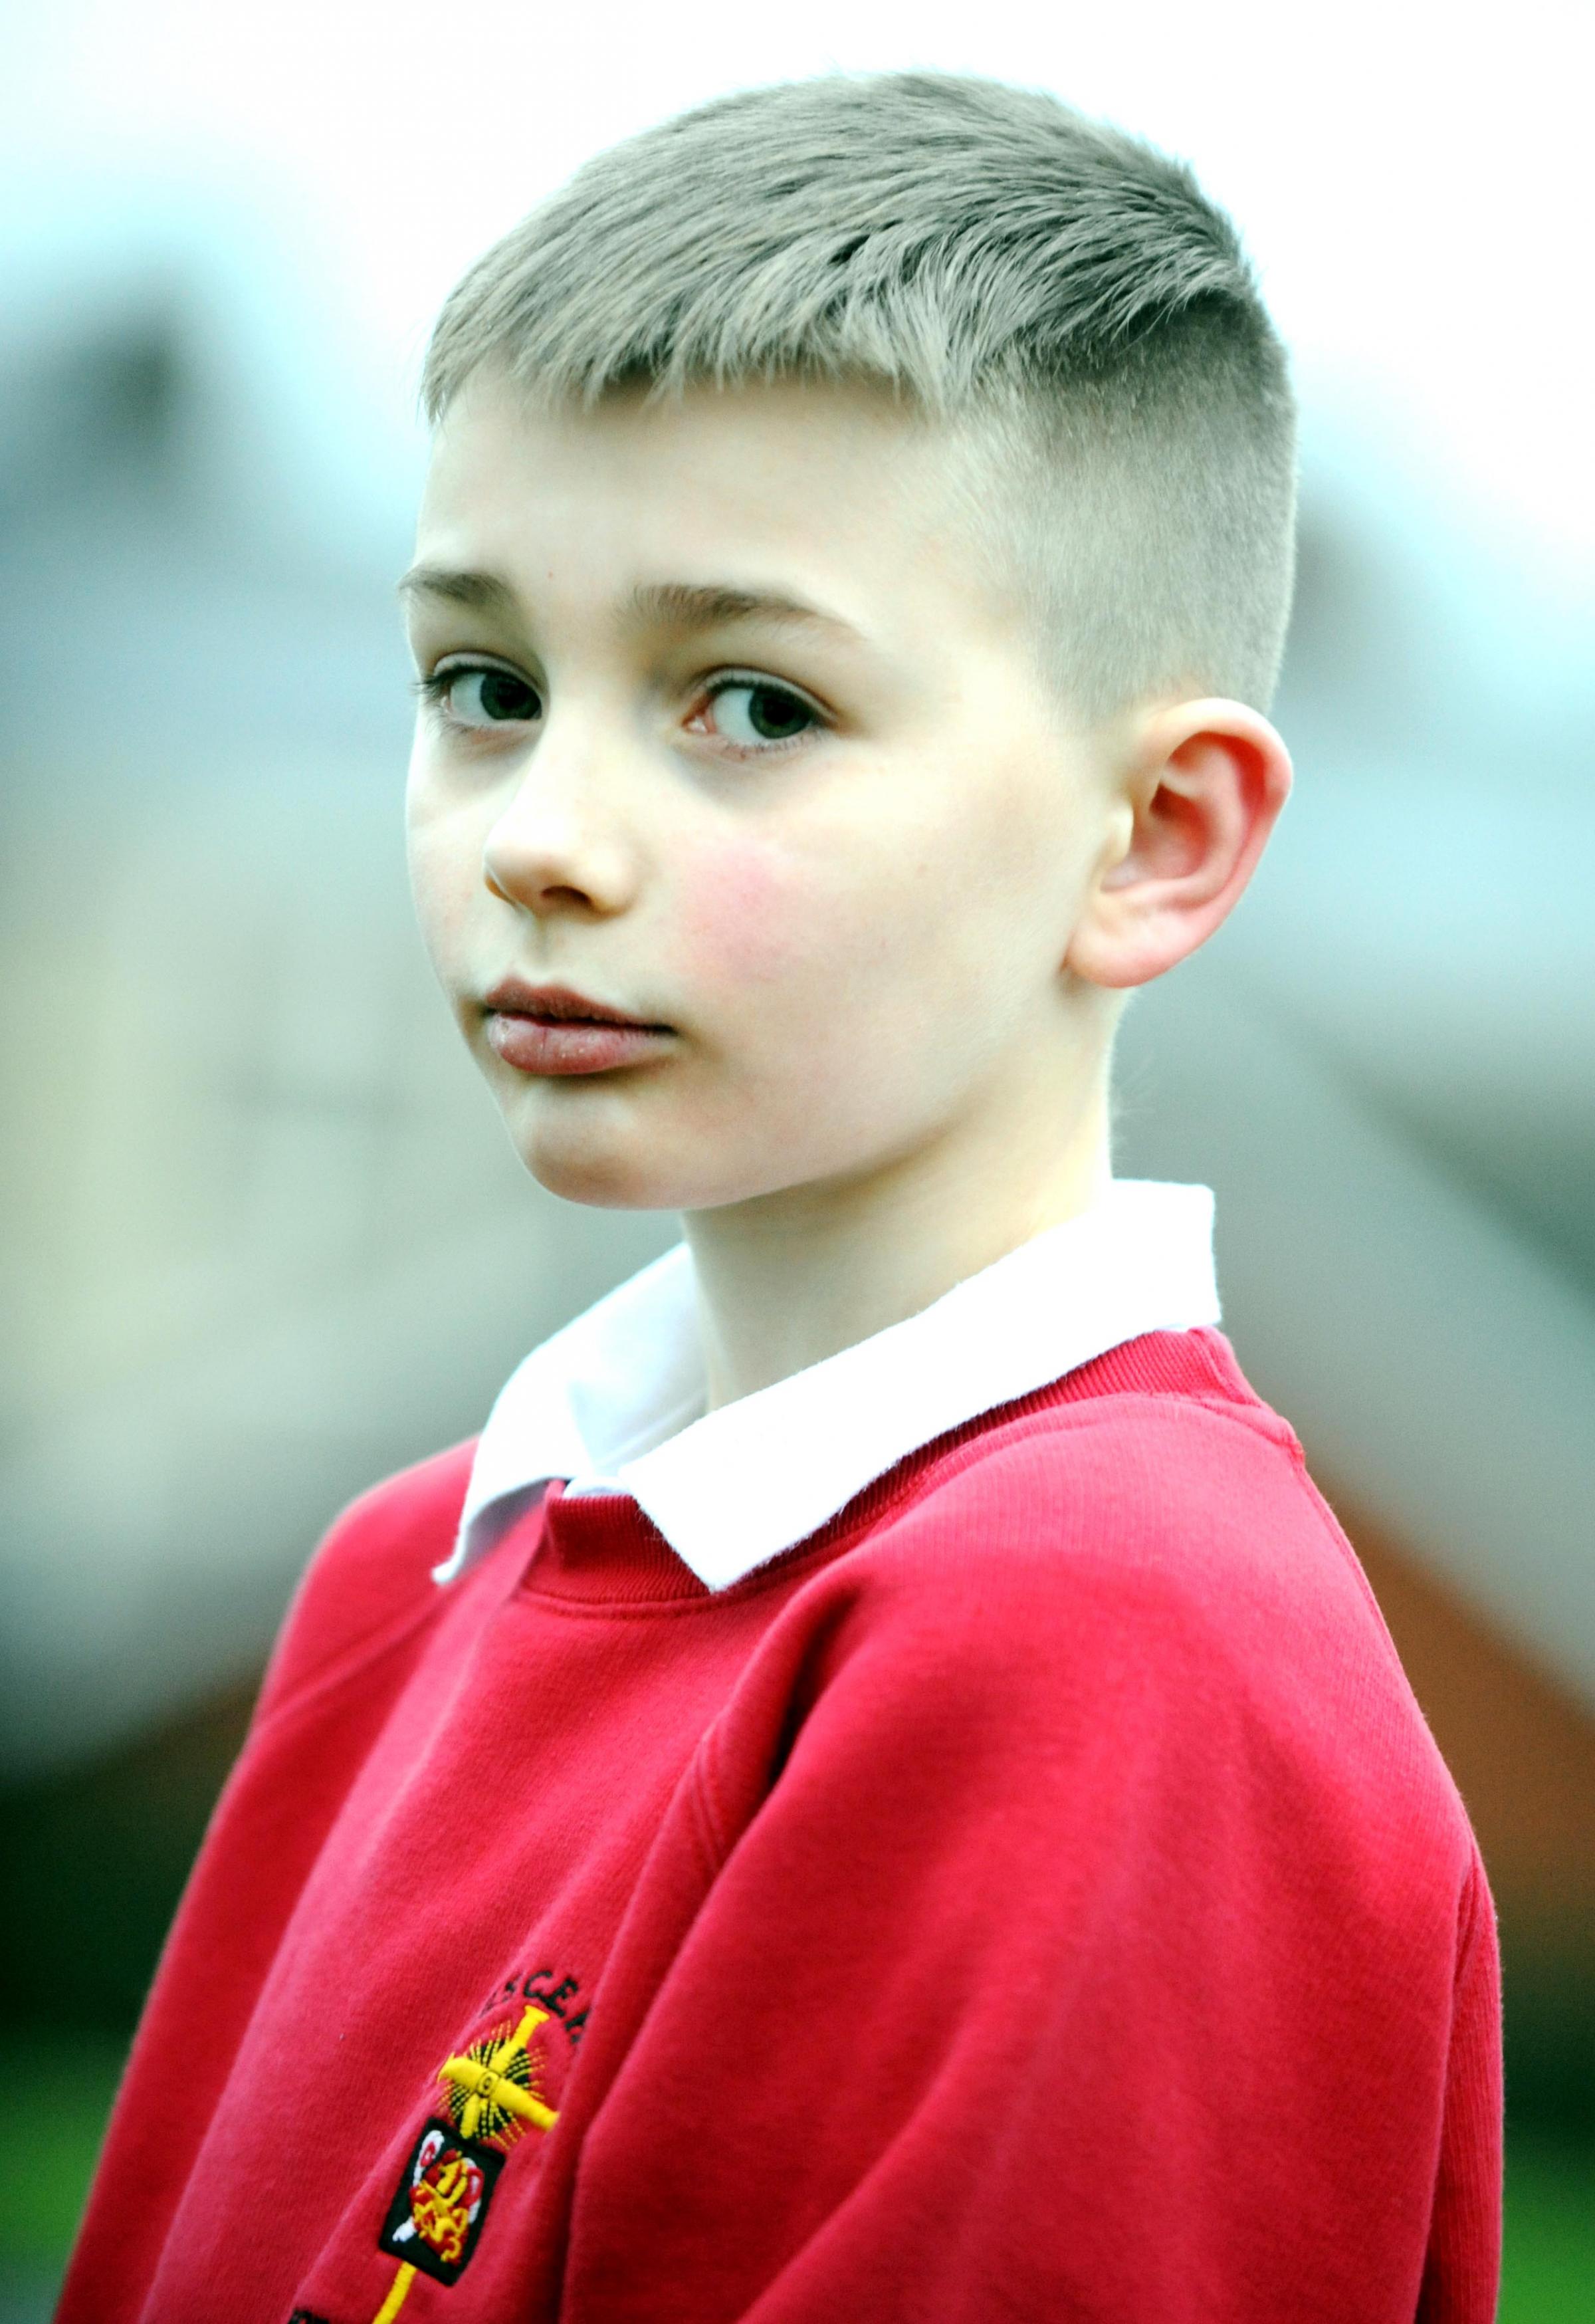 Disgrace Student Banned From Classes For Extreme Hair Cut